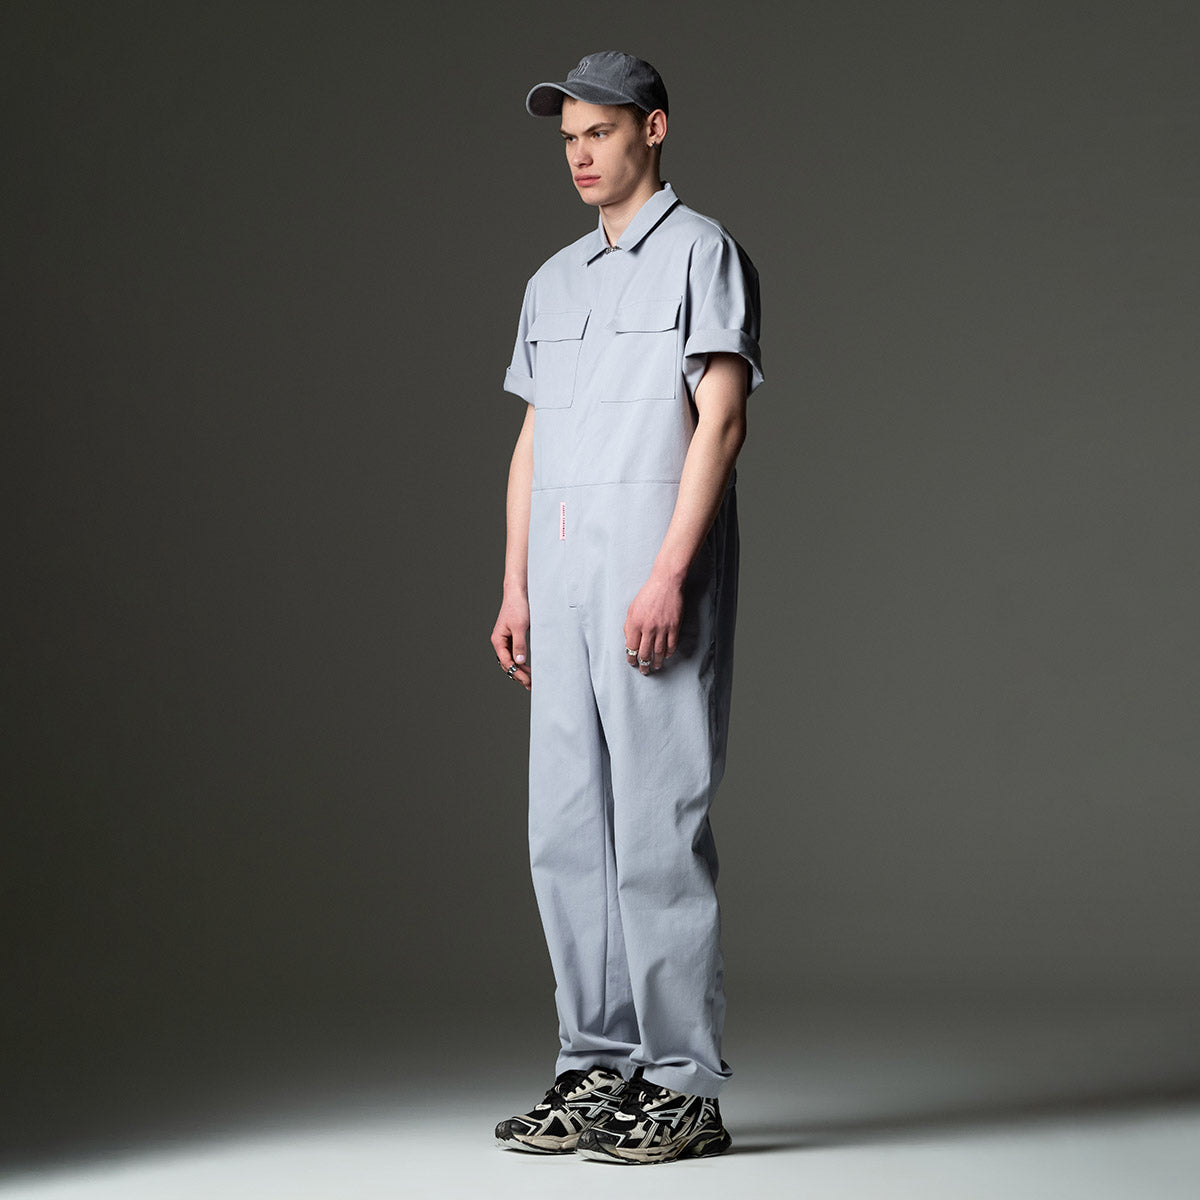 OVERALLS GREY | PIG IN A POKE BADASS IN A ROBE